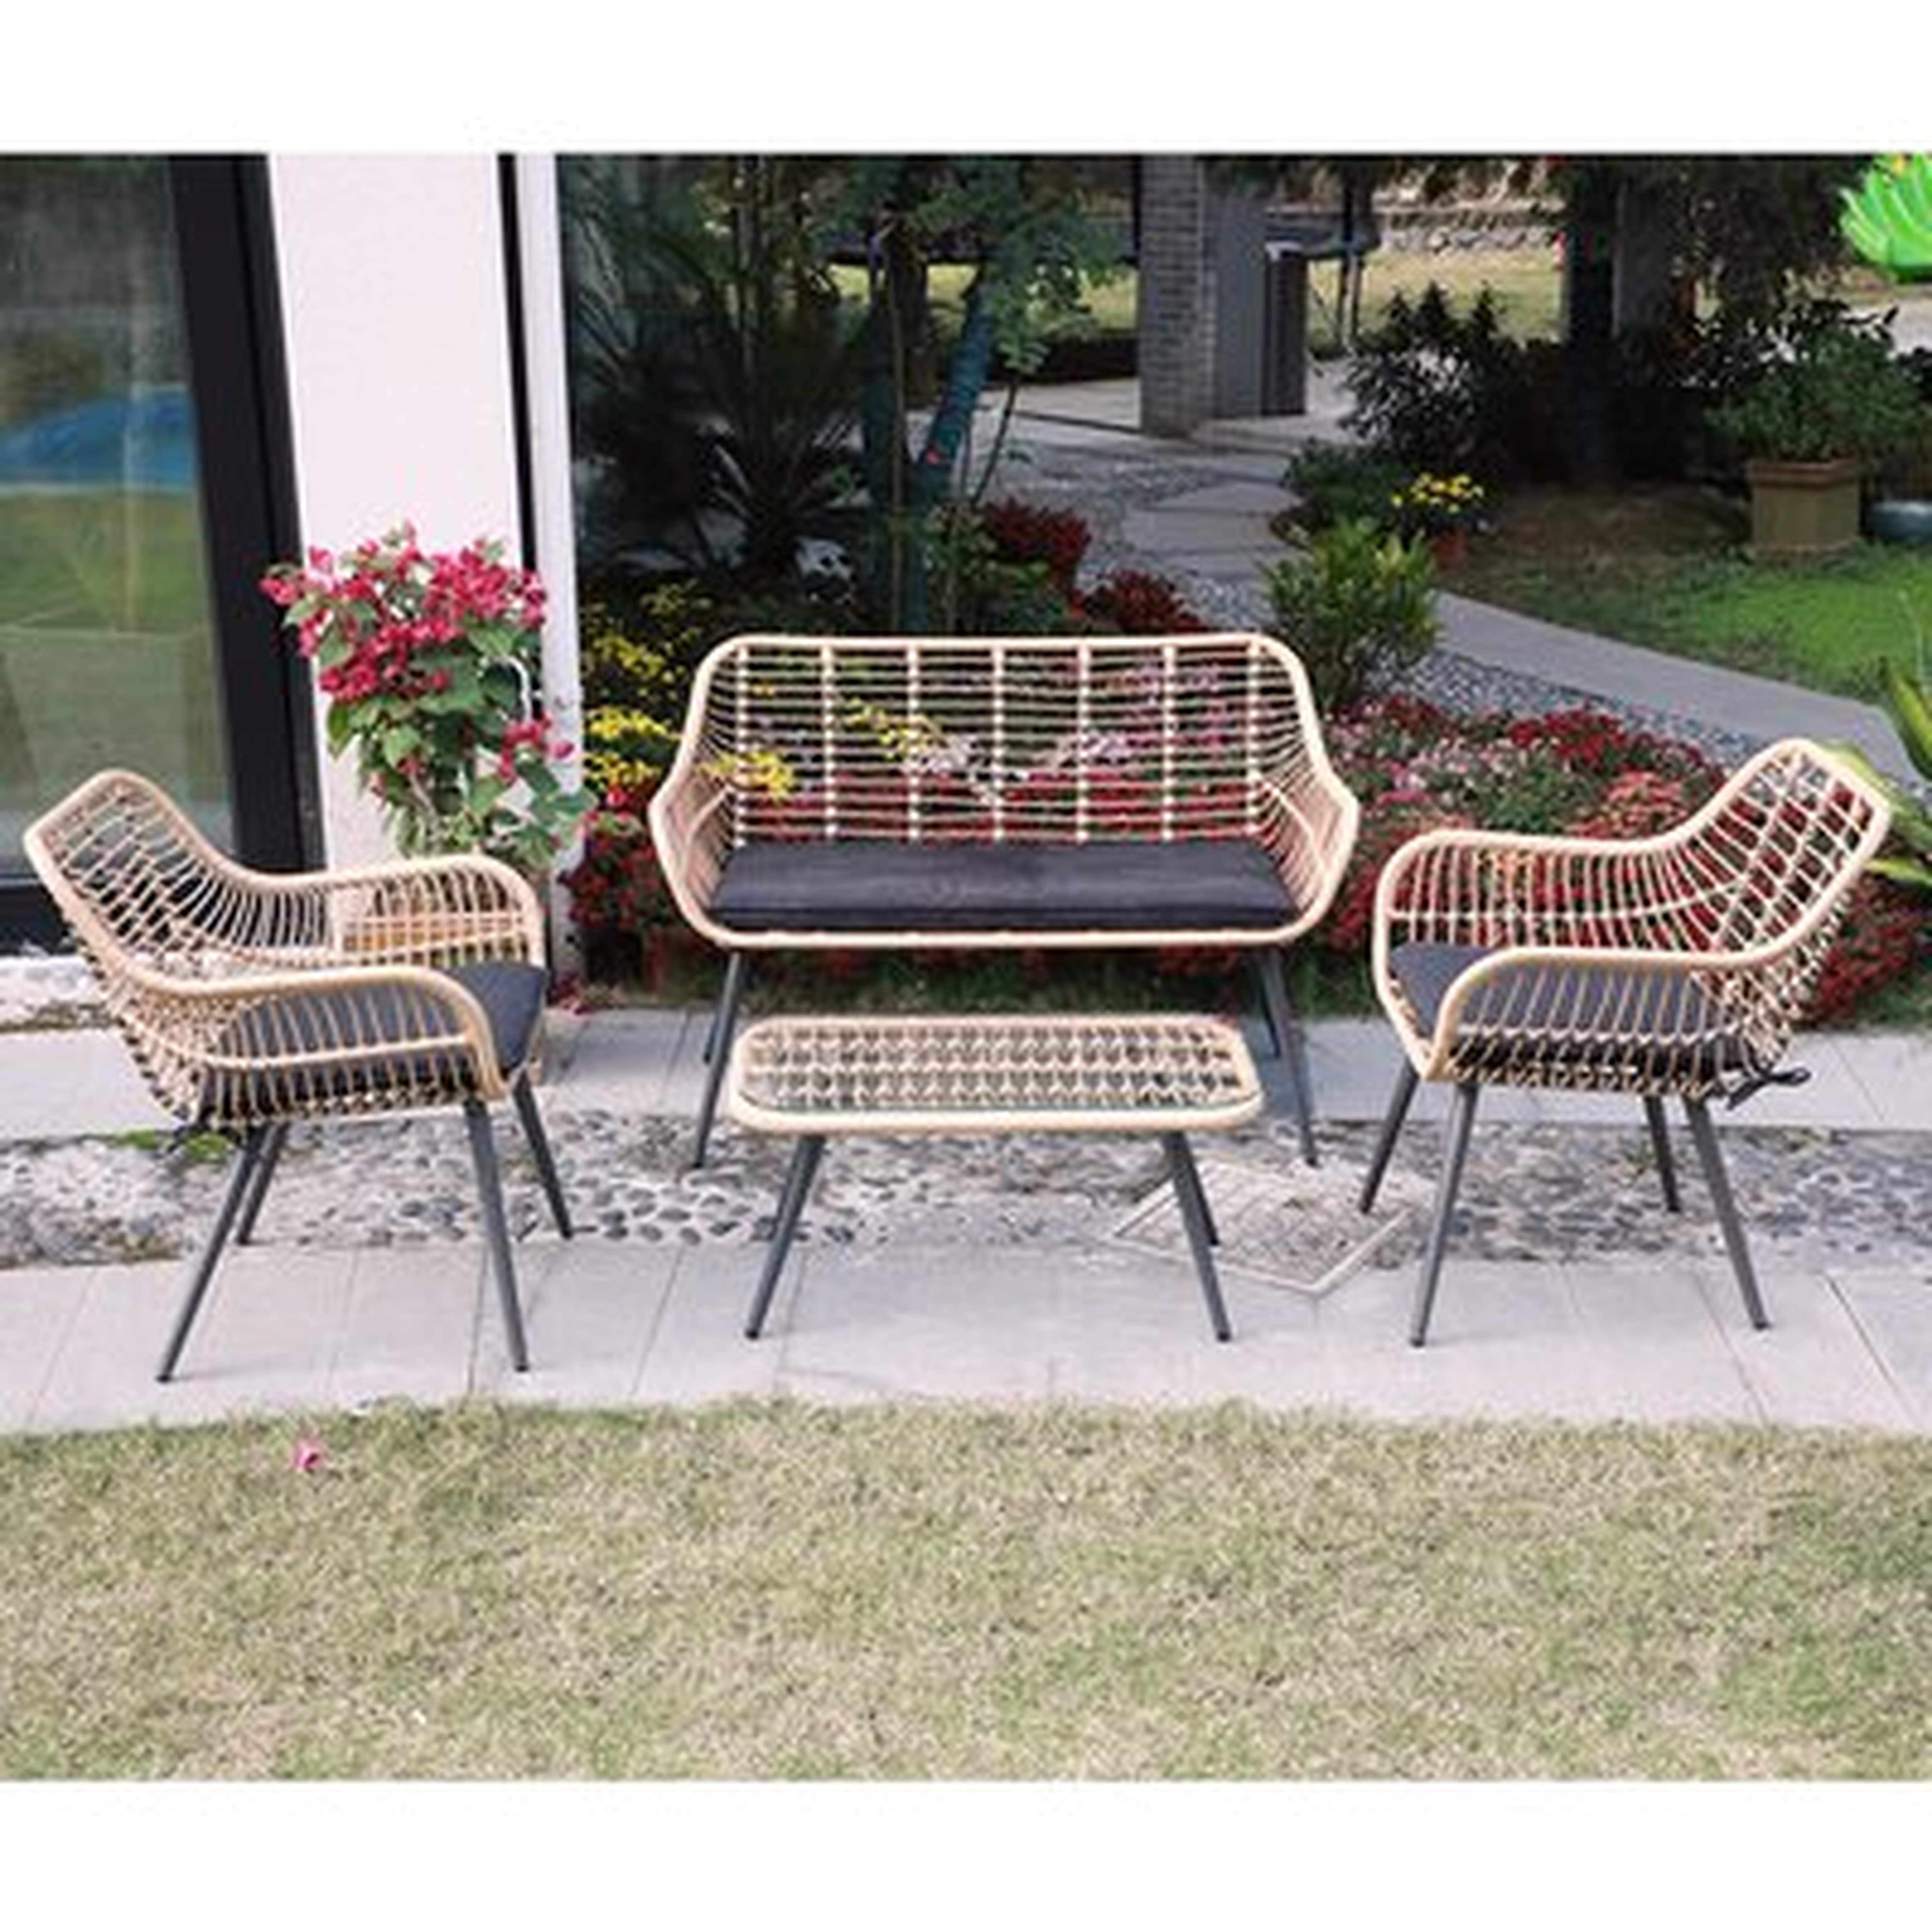 Andresen 4 Piece Rattan Sectional Seating Group with Cushions - Wayfair